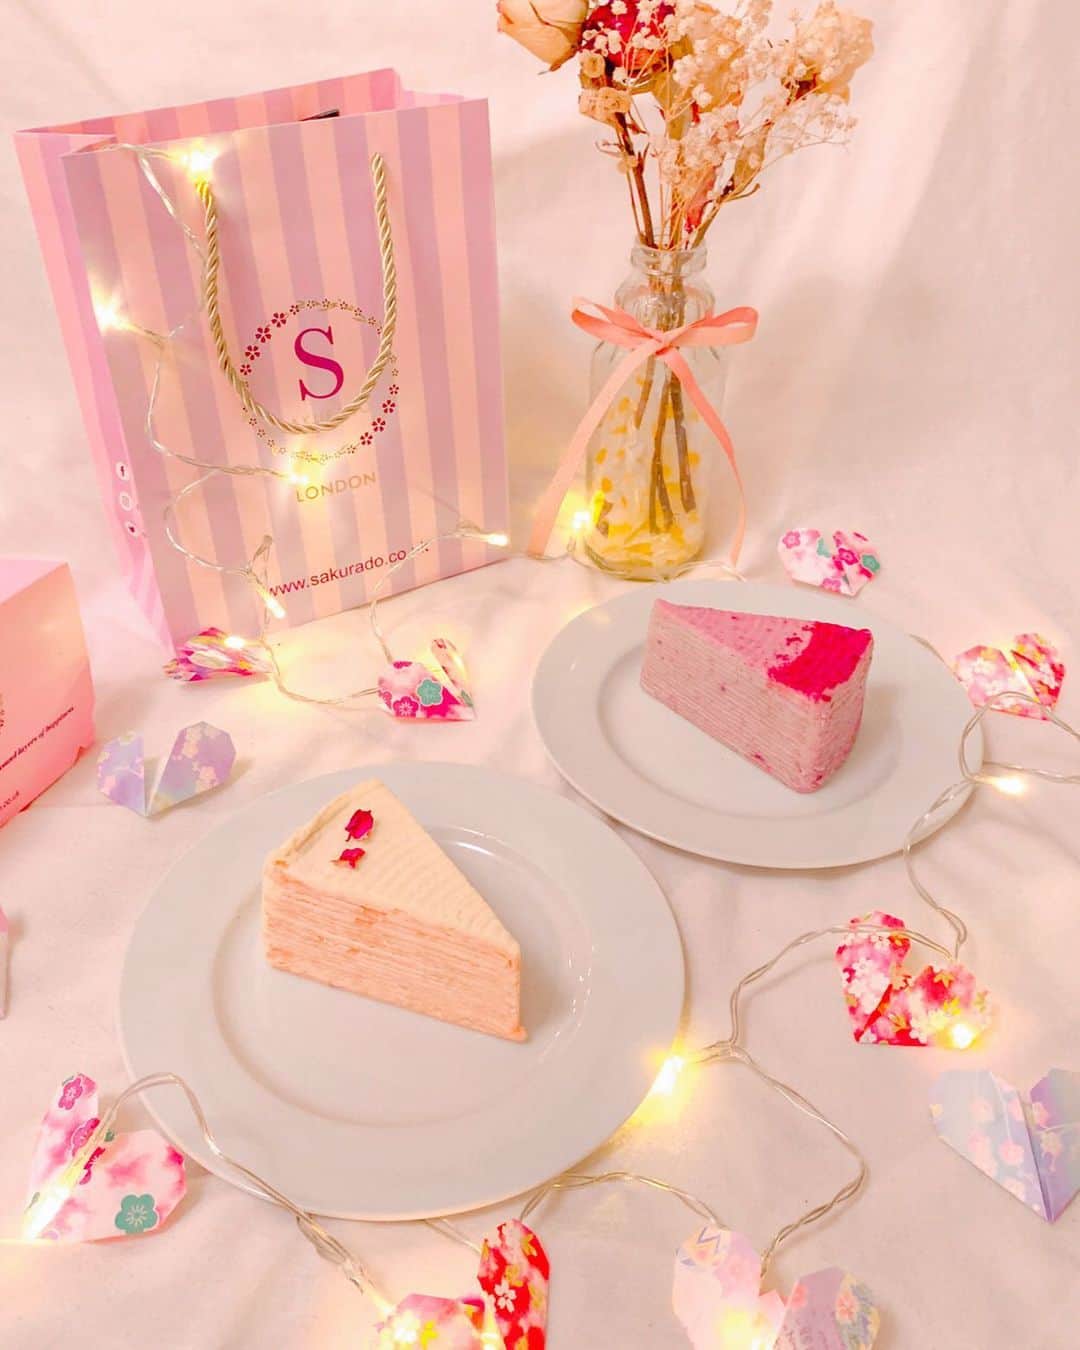 Eat With Steph & Coさんのインスタグラム写真 - (Eat With Steph & CoInstagram)「🌸 Rose & Sweet Potato Mille Crepe Cakes 🍰 @sakuradolondon ✨⠀ We had a hard time choosing at the counter as they had such a wonderful selection of flavours. The rose mille crepe we tried was more floral and delicate whilst the sweet potato slice was richer in taste, but both were so delightfully creamy and delicious! 💖⠀ Plus they also have matcha, hojicha, yuzu, mango, lychee, sesame and even durian I hear... 😉💕 So make sure to save these for a sweet afternoon when you next pass by @chinatownlondon! #invite⠀ ⠀ 📸 @rain.sprout⠀ ⠀ 📍 Location: Soho⠀ 💰 Price: £6.25 per slice⠀ 👨‍🍳 Cuisine: Japanese⠀ ❤️ Best for: Desserts⠀ ☎️ Book ahead: Takeaway only⠀ 🌱 Veg options: Contain eggs & milk⠀ 🍽 Top dishes: Mille crepe cakes⠀ ⠀ ⠀ ⠀ #foodstagram #eeeeeats #forkyeah #londonfood #timeoutlondon #eatlondon #infatuationlondon #foodenvy #eatinglondon #foodinlondon⠀ #millecrepe #millecrepes #dessert #dessertlovers #londondessert #sweetpotatocake #purplesweetpotato #millecrepecake #sweettoothcravings #crepecake #dessertshop #beautifuldesserts #patisserie #soholondon #cakesofinstagram #rosecake #pinkcakes #cakelover」12月18日 17時08分 - eatwithsteph_ldn